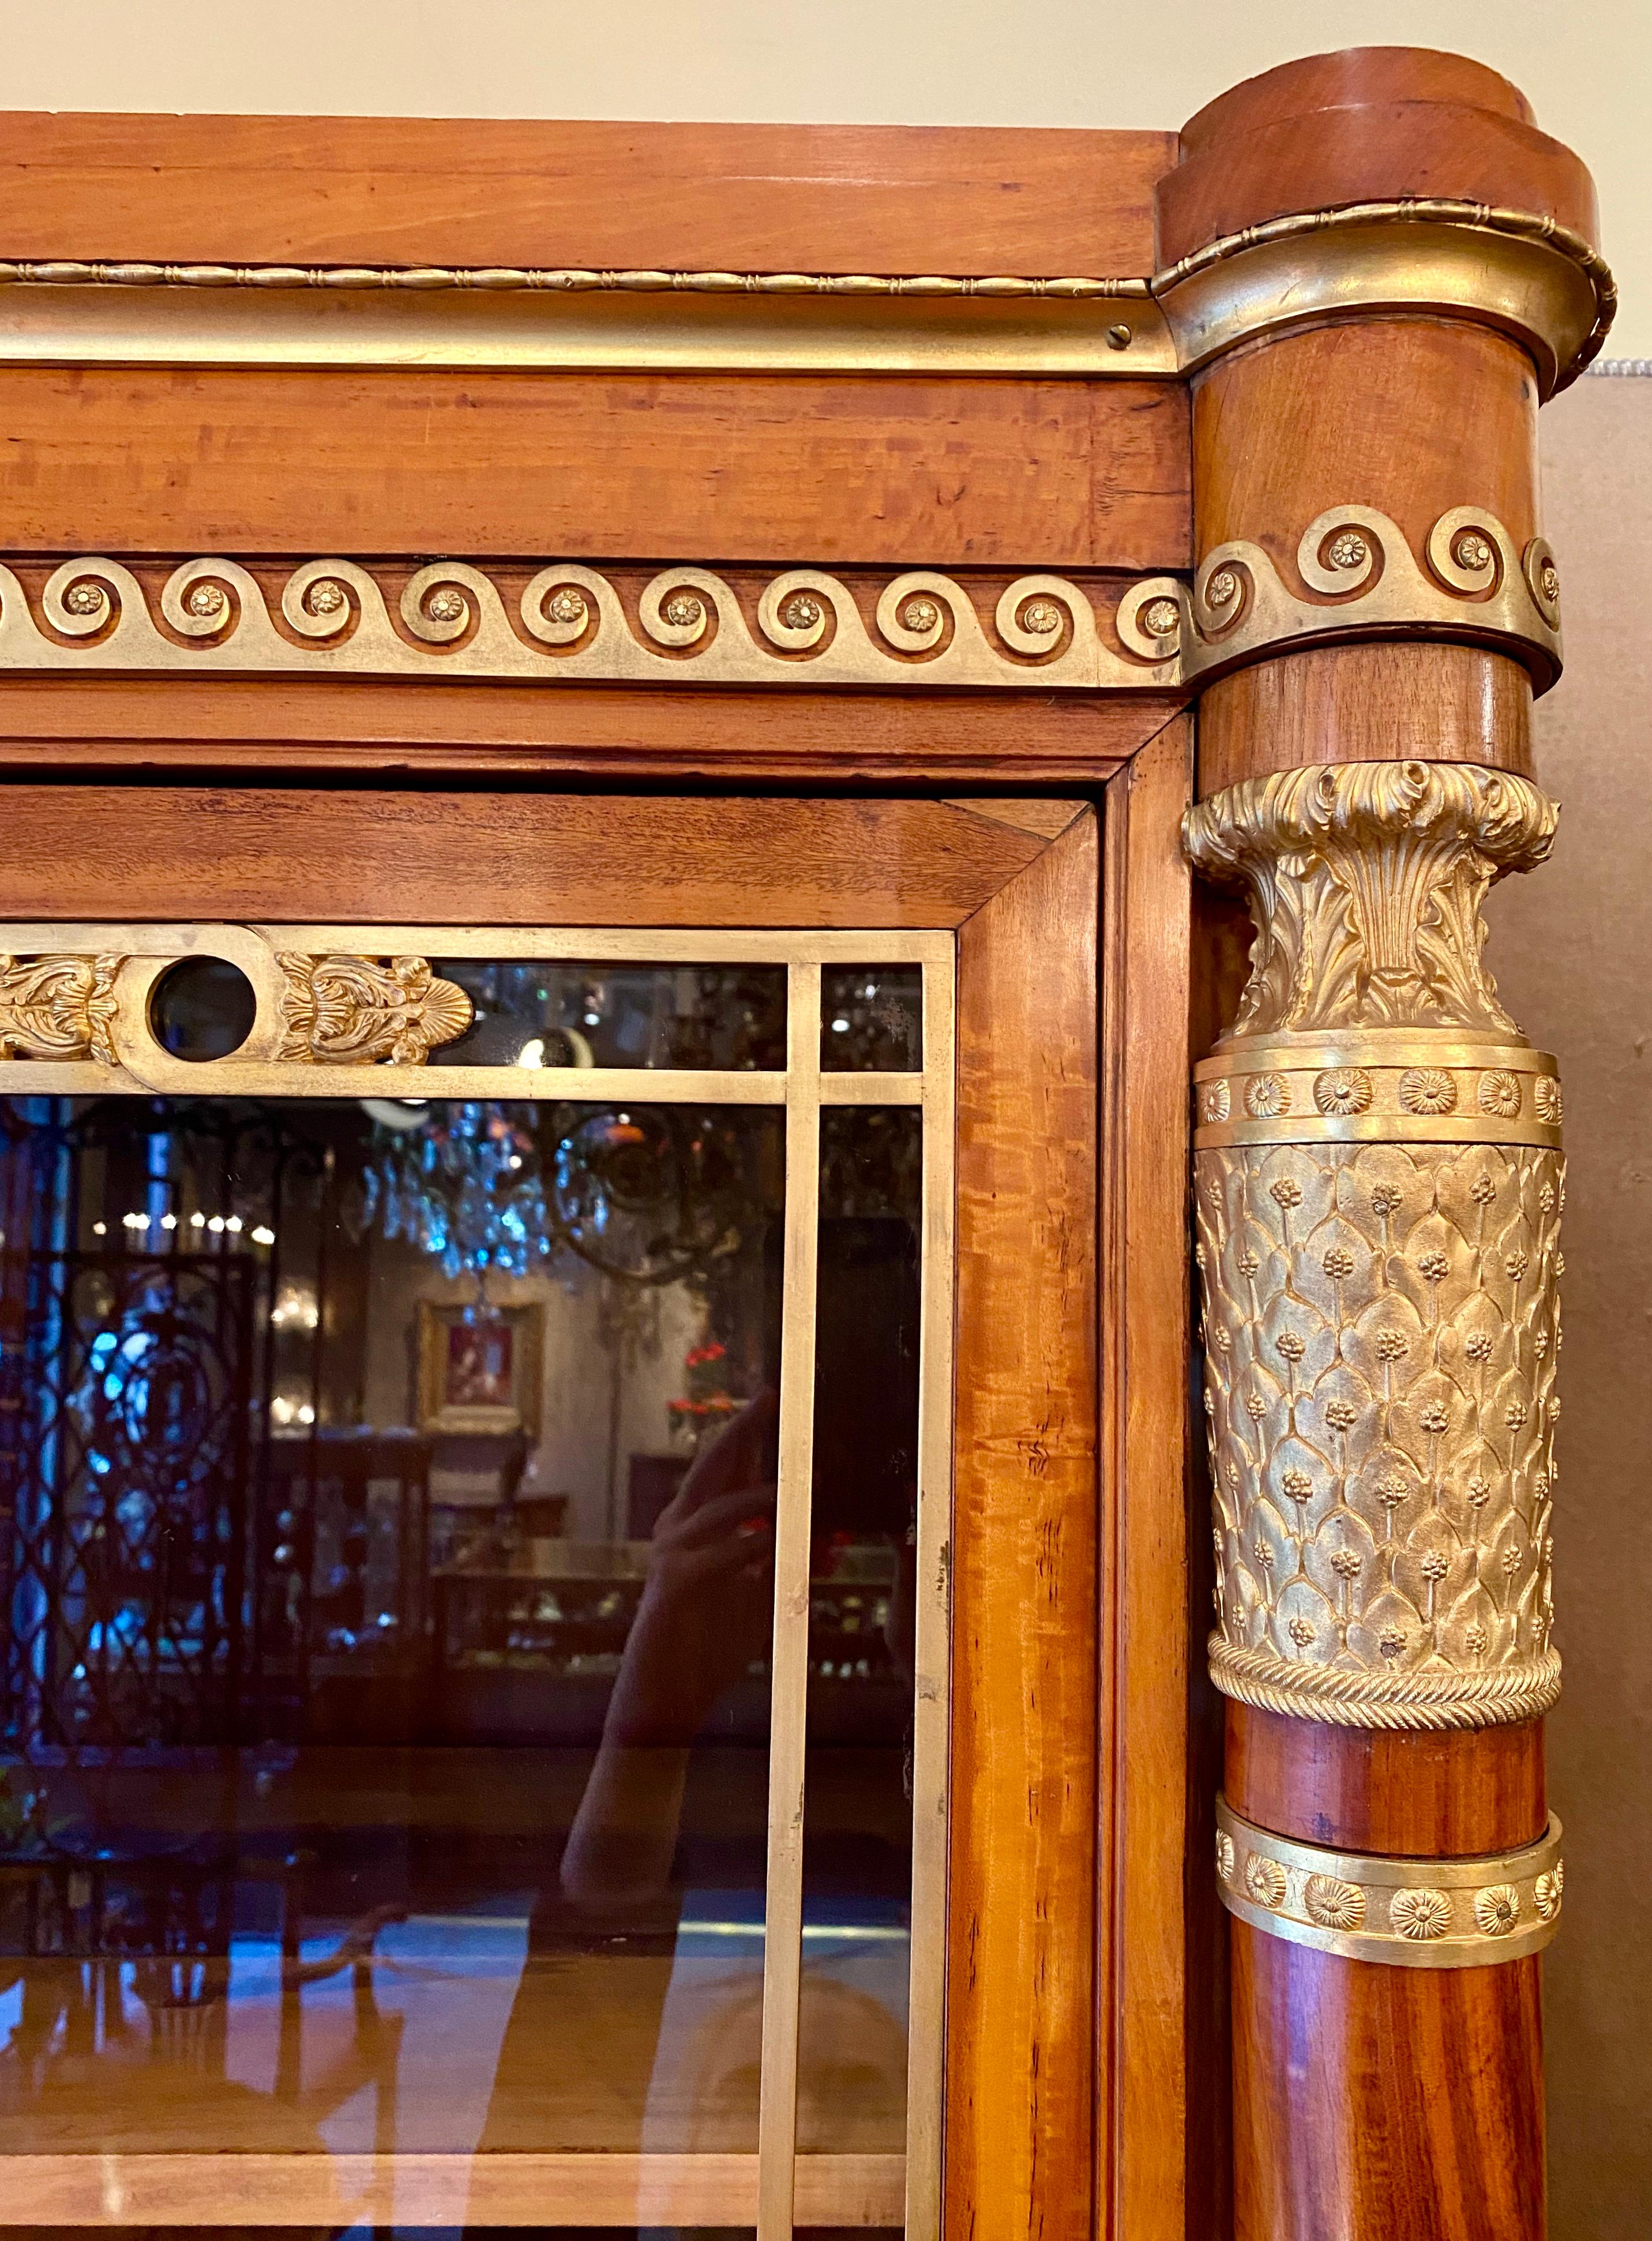 Magnificent antique French satinwood and bronze dore vitrine or display cabinet, circa 1890.
FCAB001.